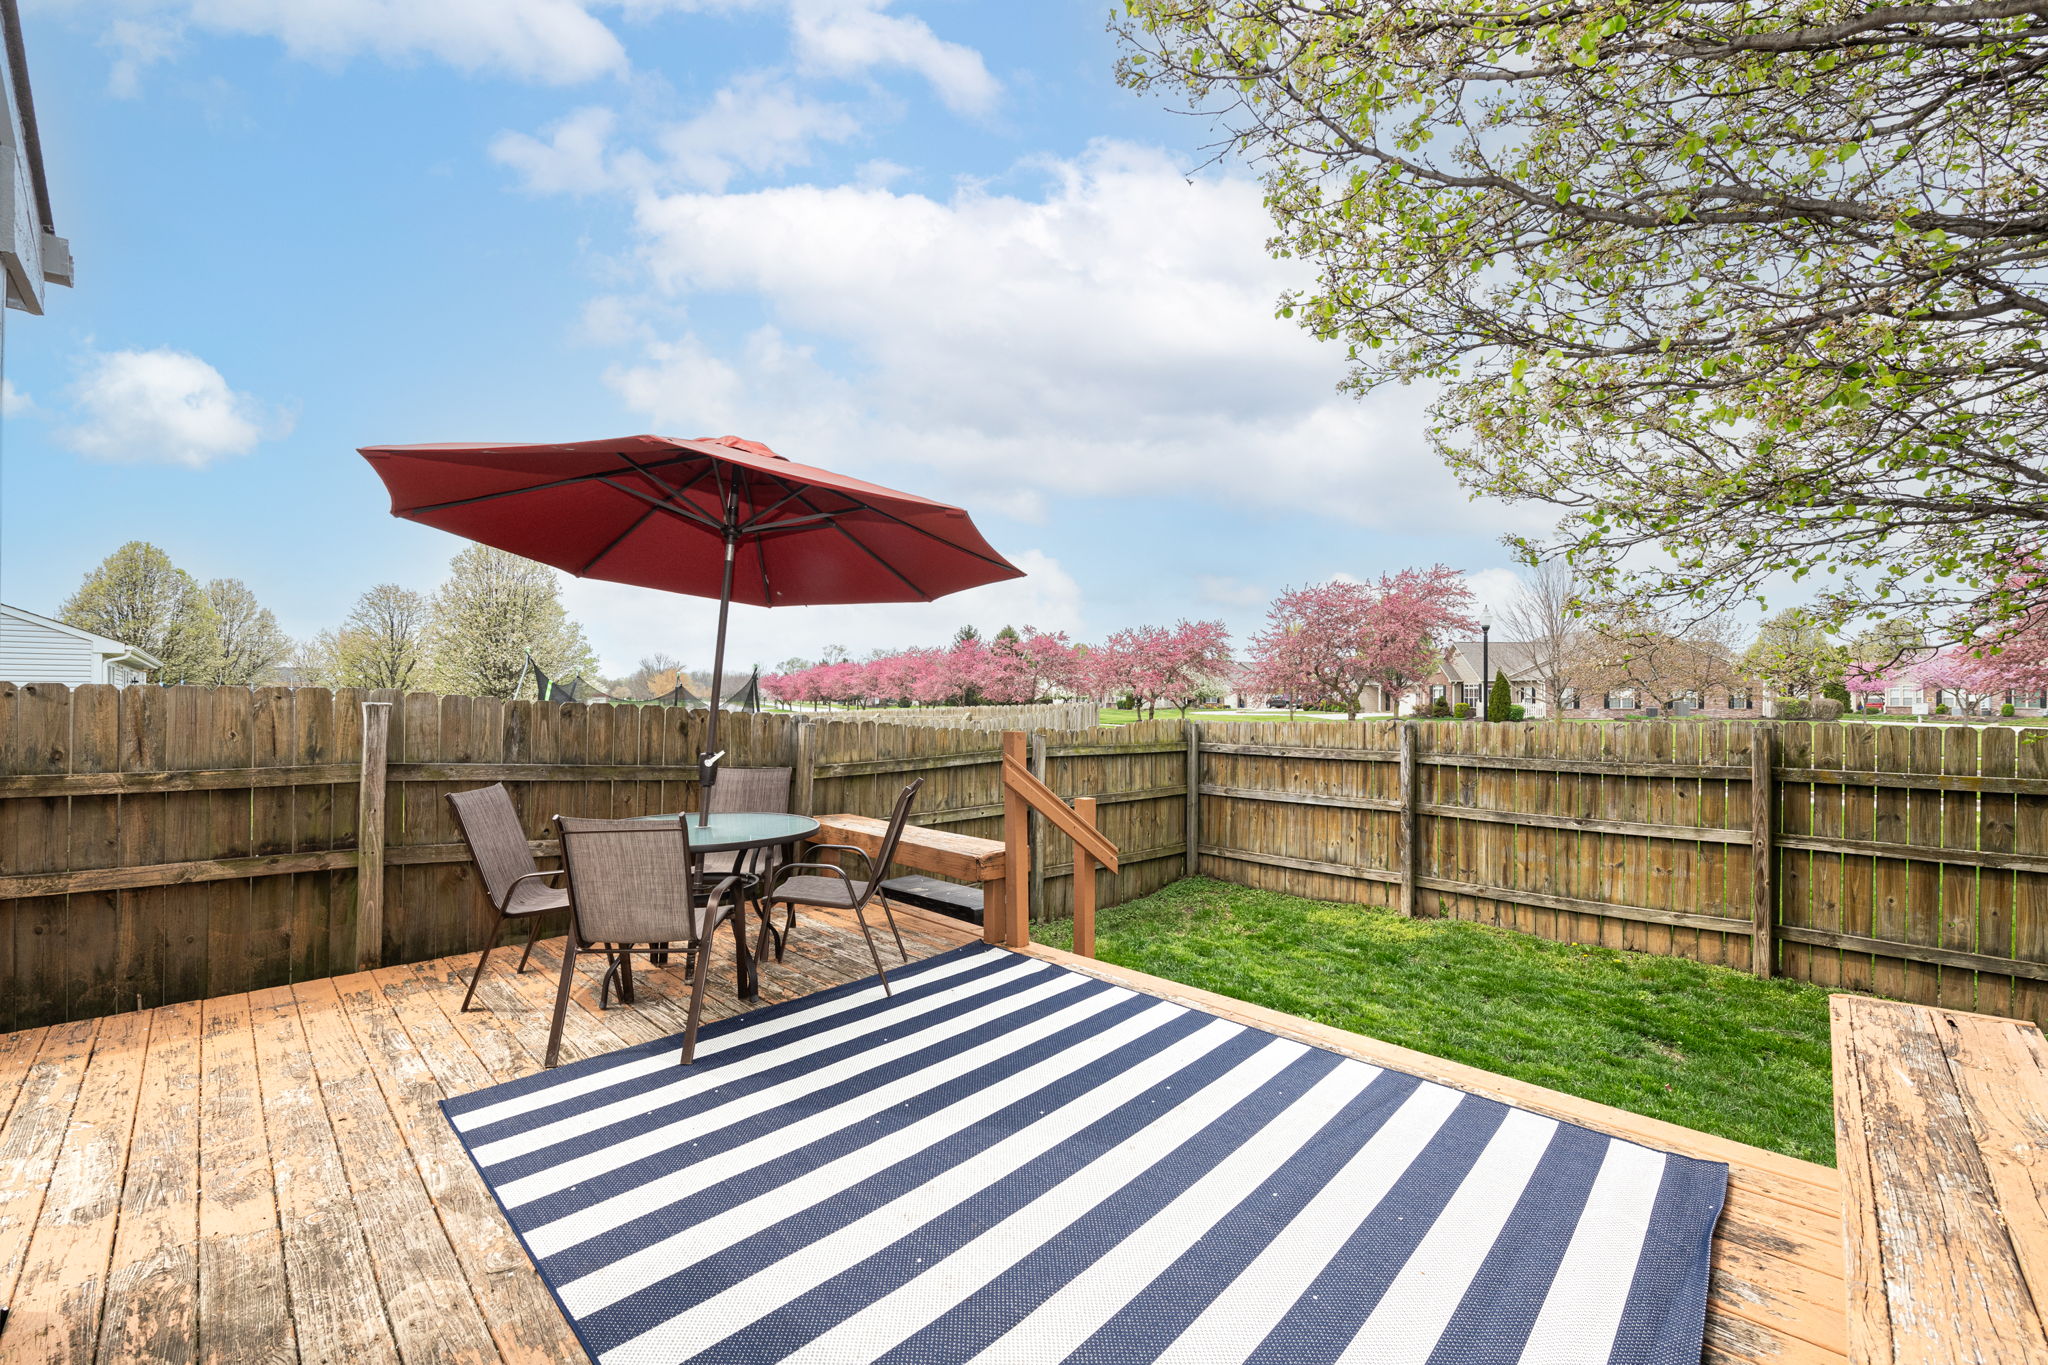 Gather your family and friends for parties & get togethers on this spacious deck with built in seating.